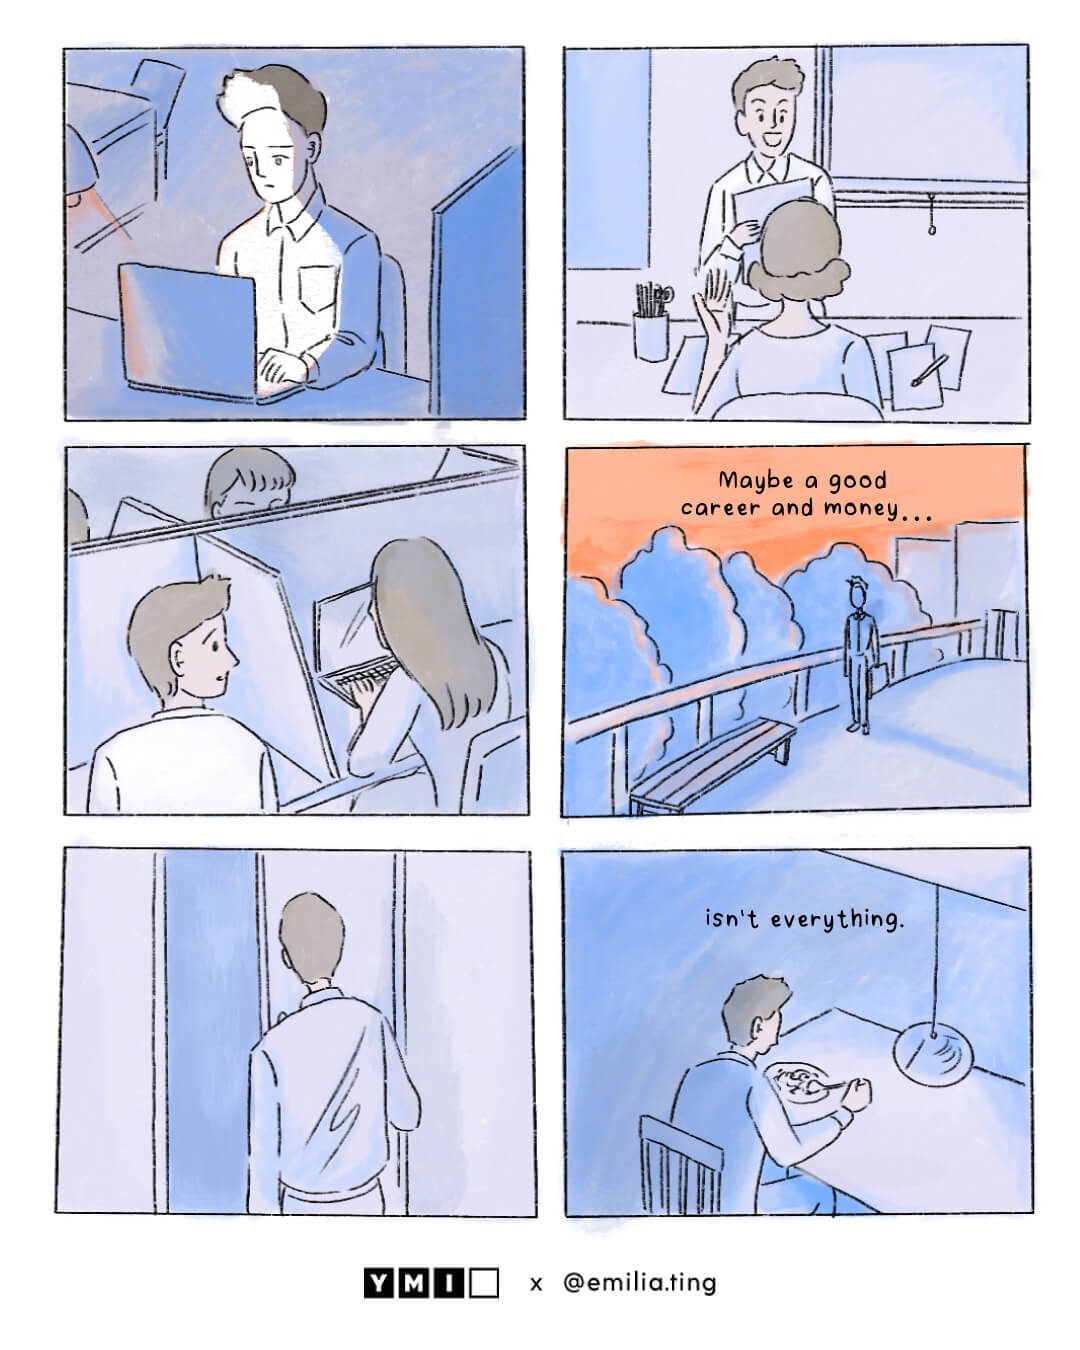 6 panels of comic to convey about the loneliness of being alone in a big city with good salary and job, but not someone close.